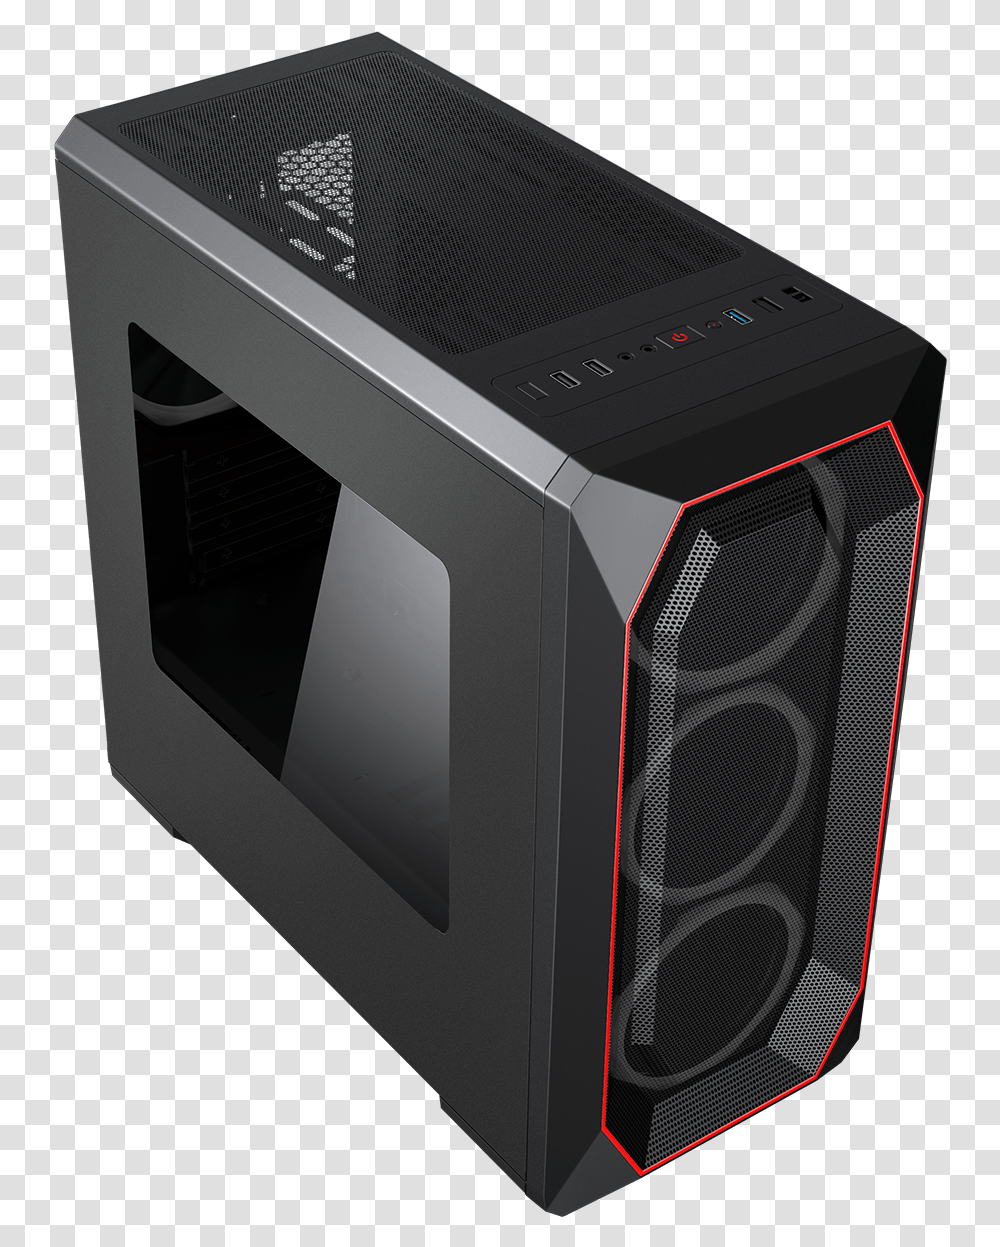 Game Max Kamikaze Pc Gaming Case With Window Pc Case Background, Electronics, Speaker, Audio Speaker, Mailbox Transparent Png